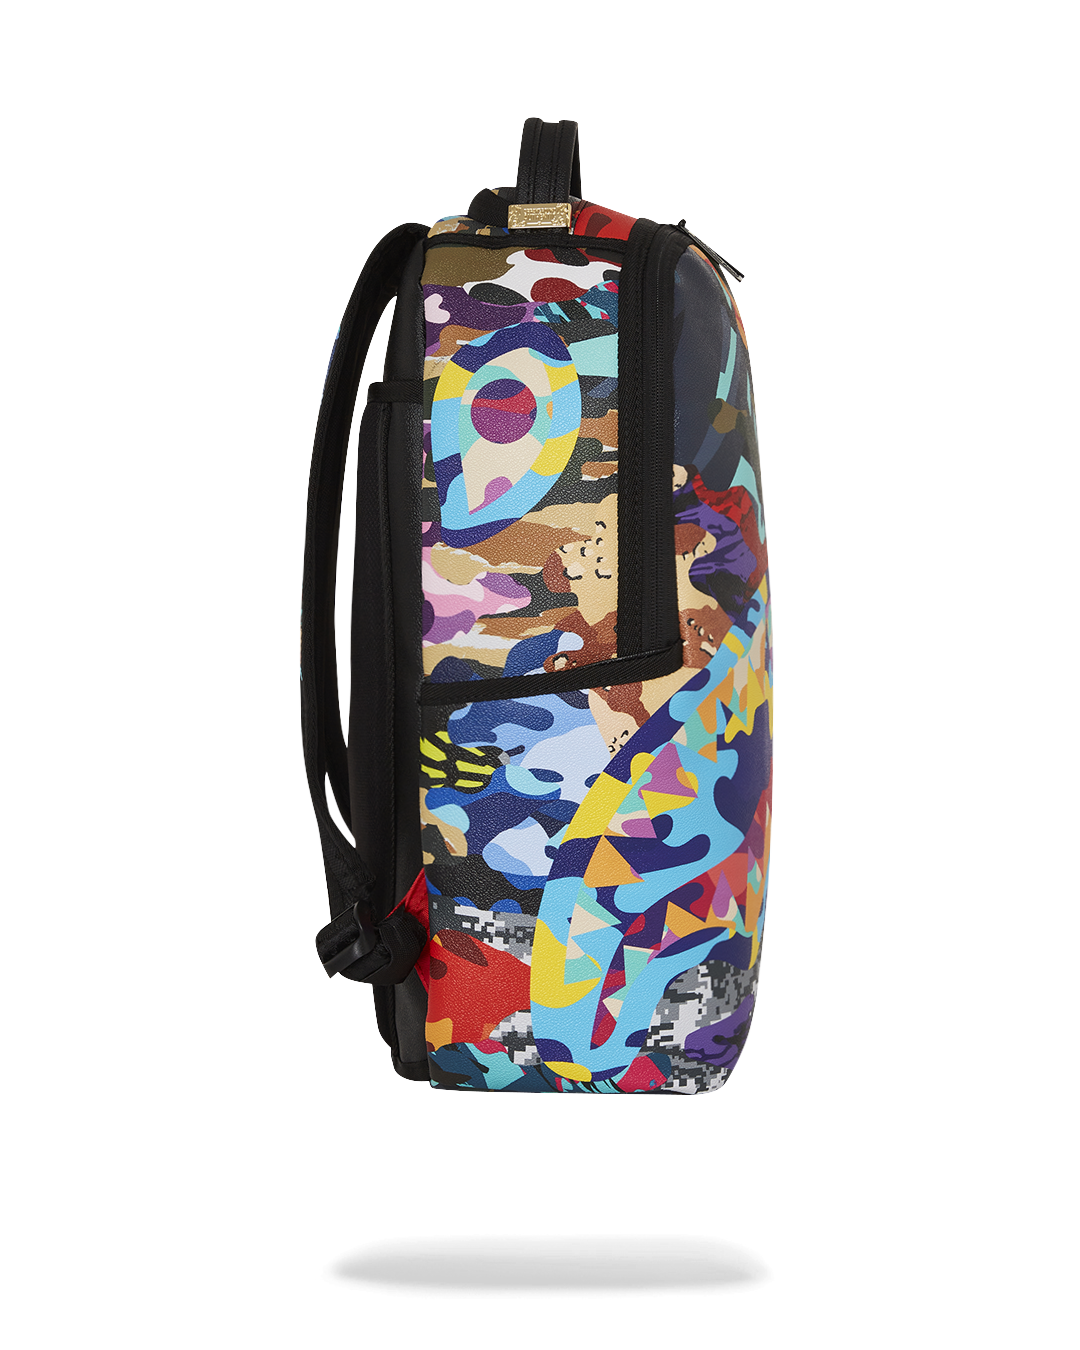 SLICED AND DICED CAMO BACKPACK